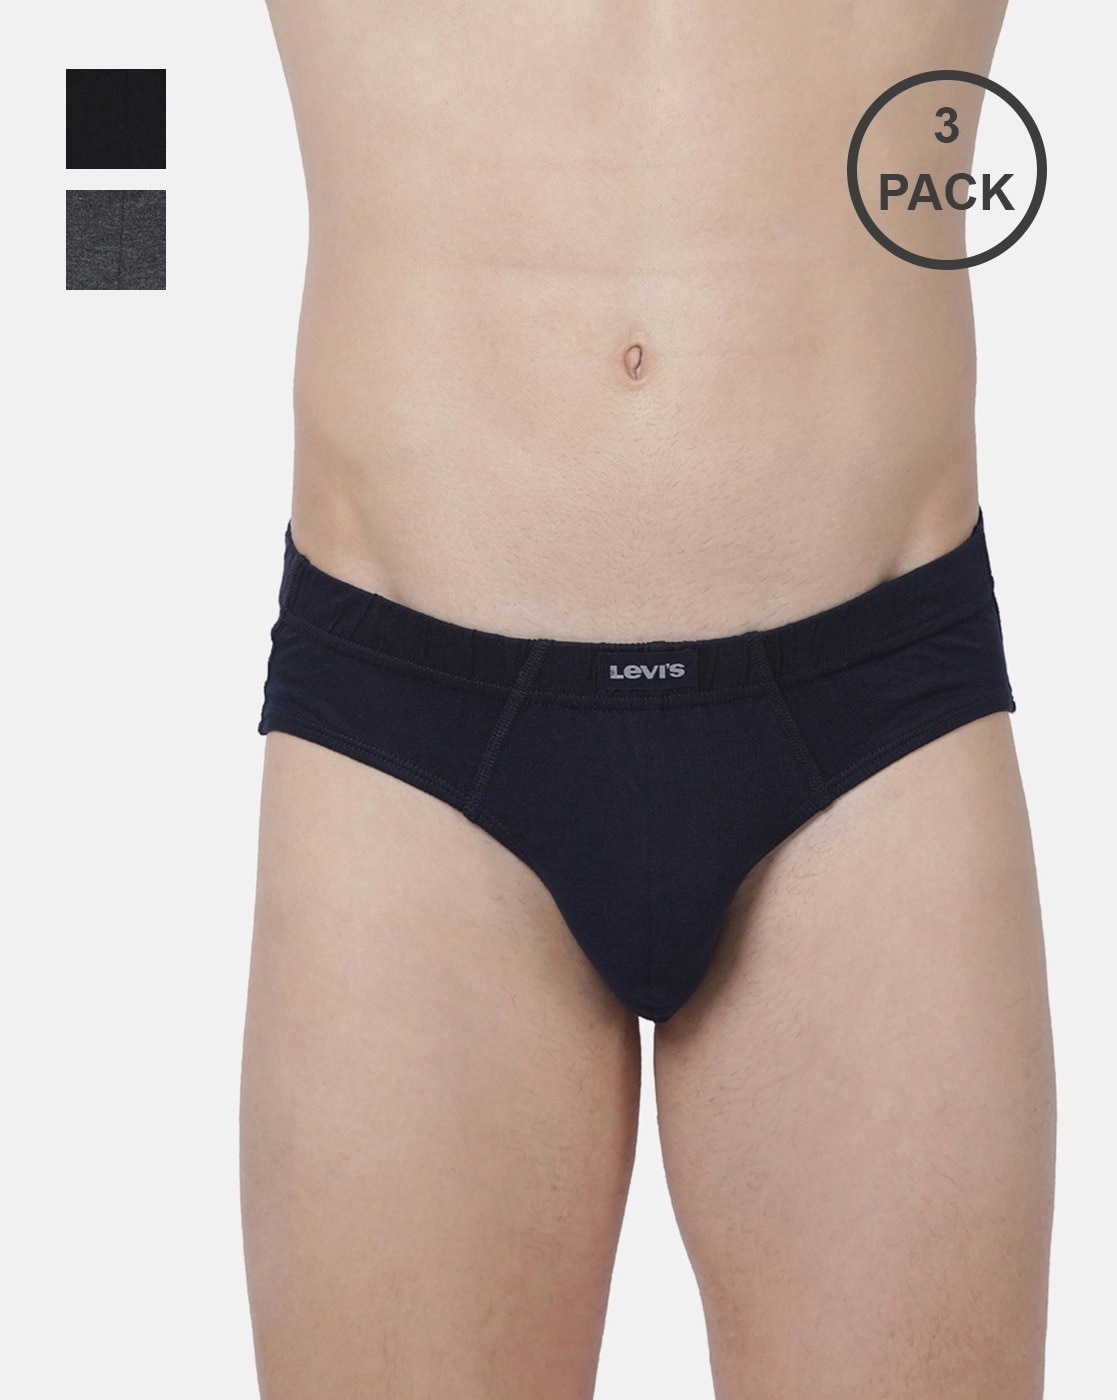 Pack of 3 Cotton Briefs with Elasticated Waistband